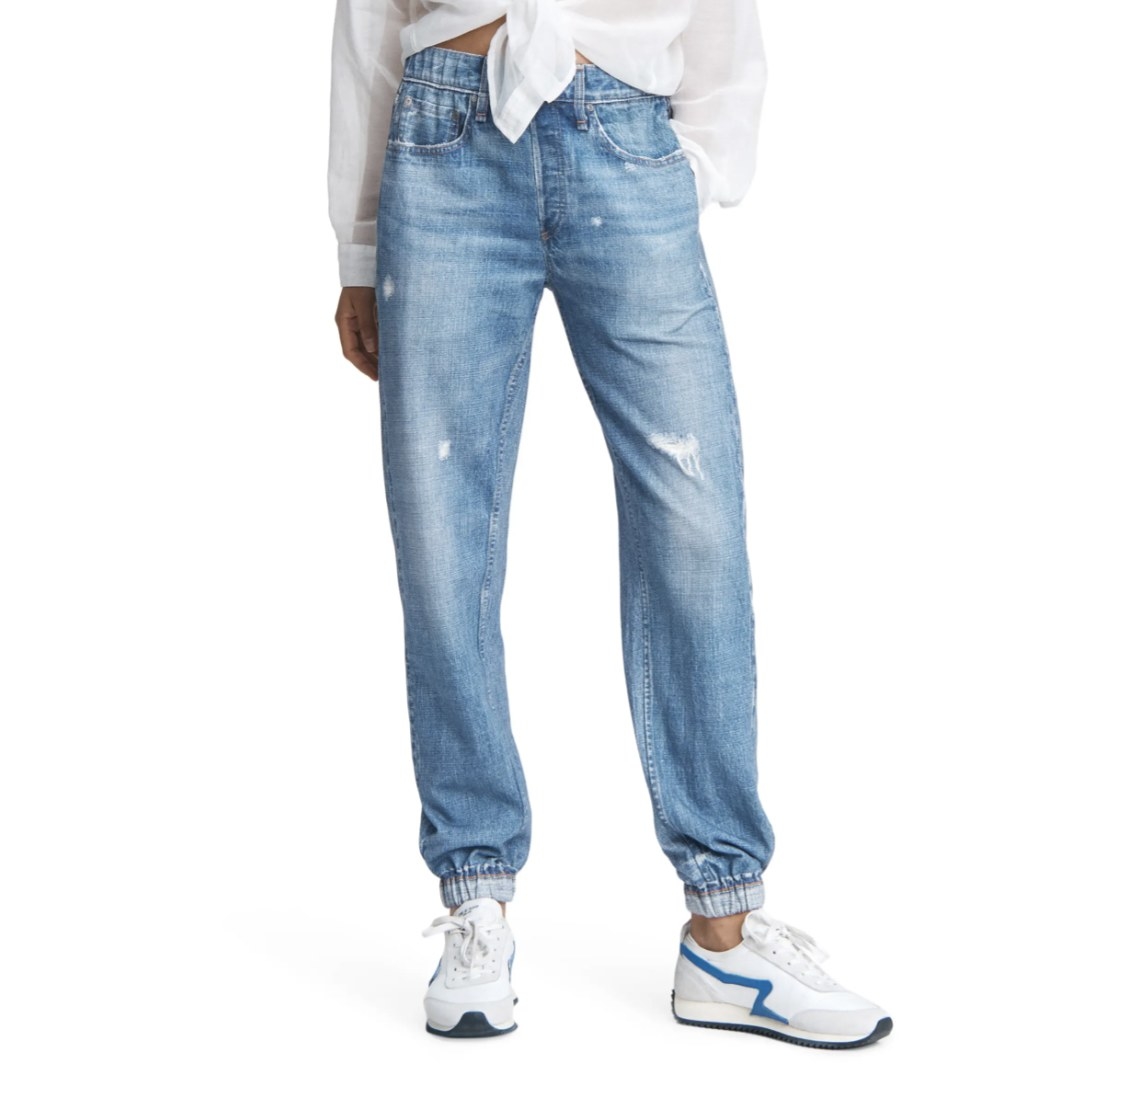 Model is wearing denim joggers and white sneakers